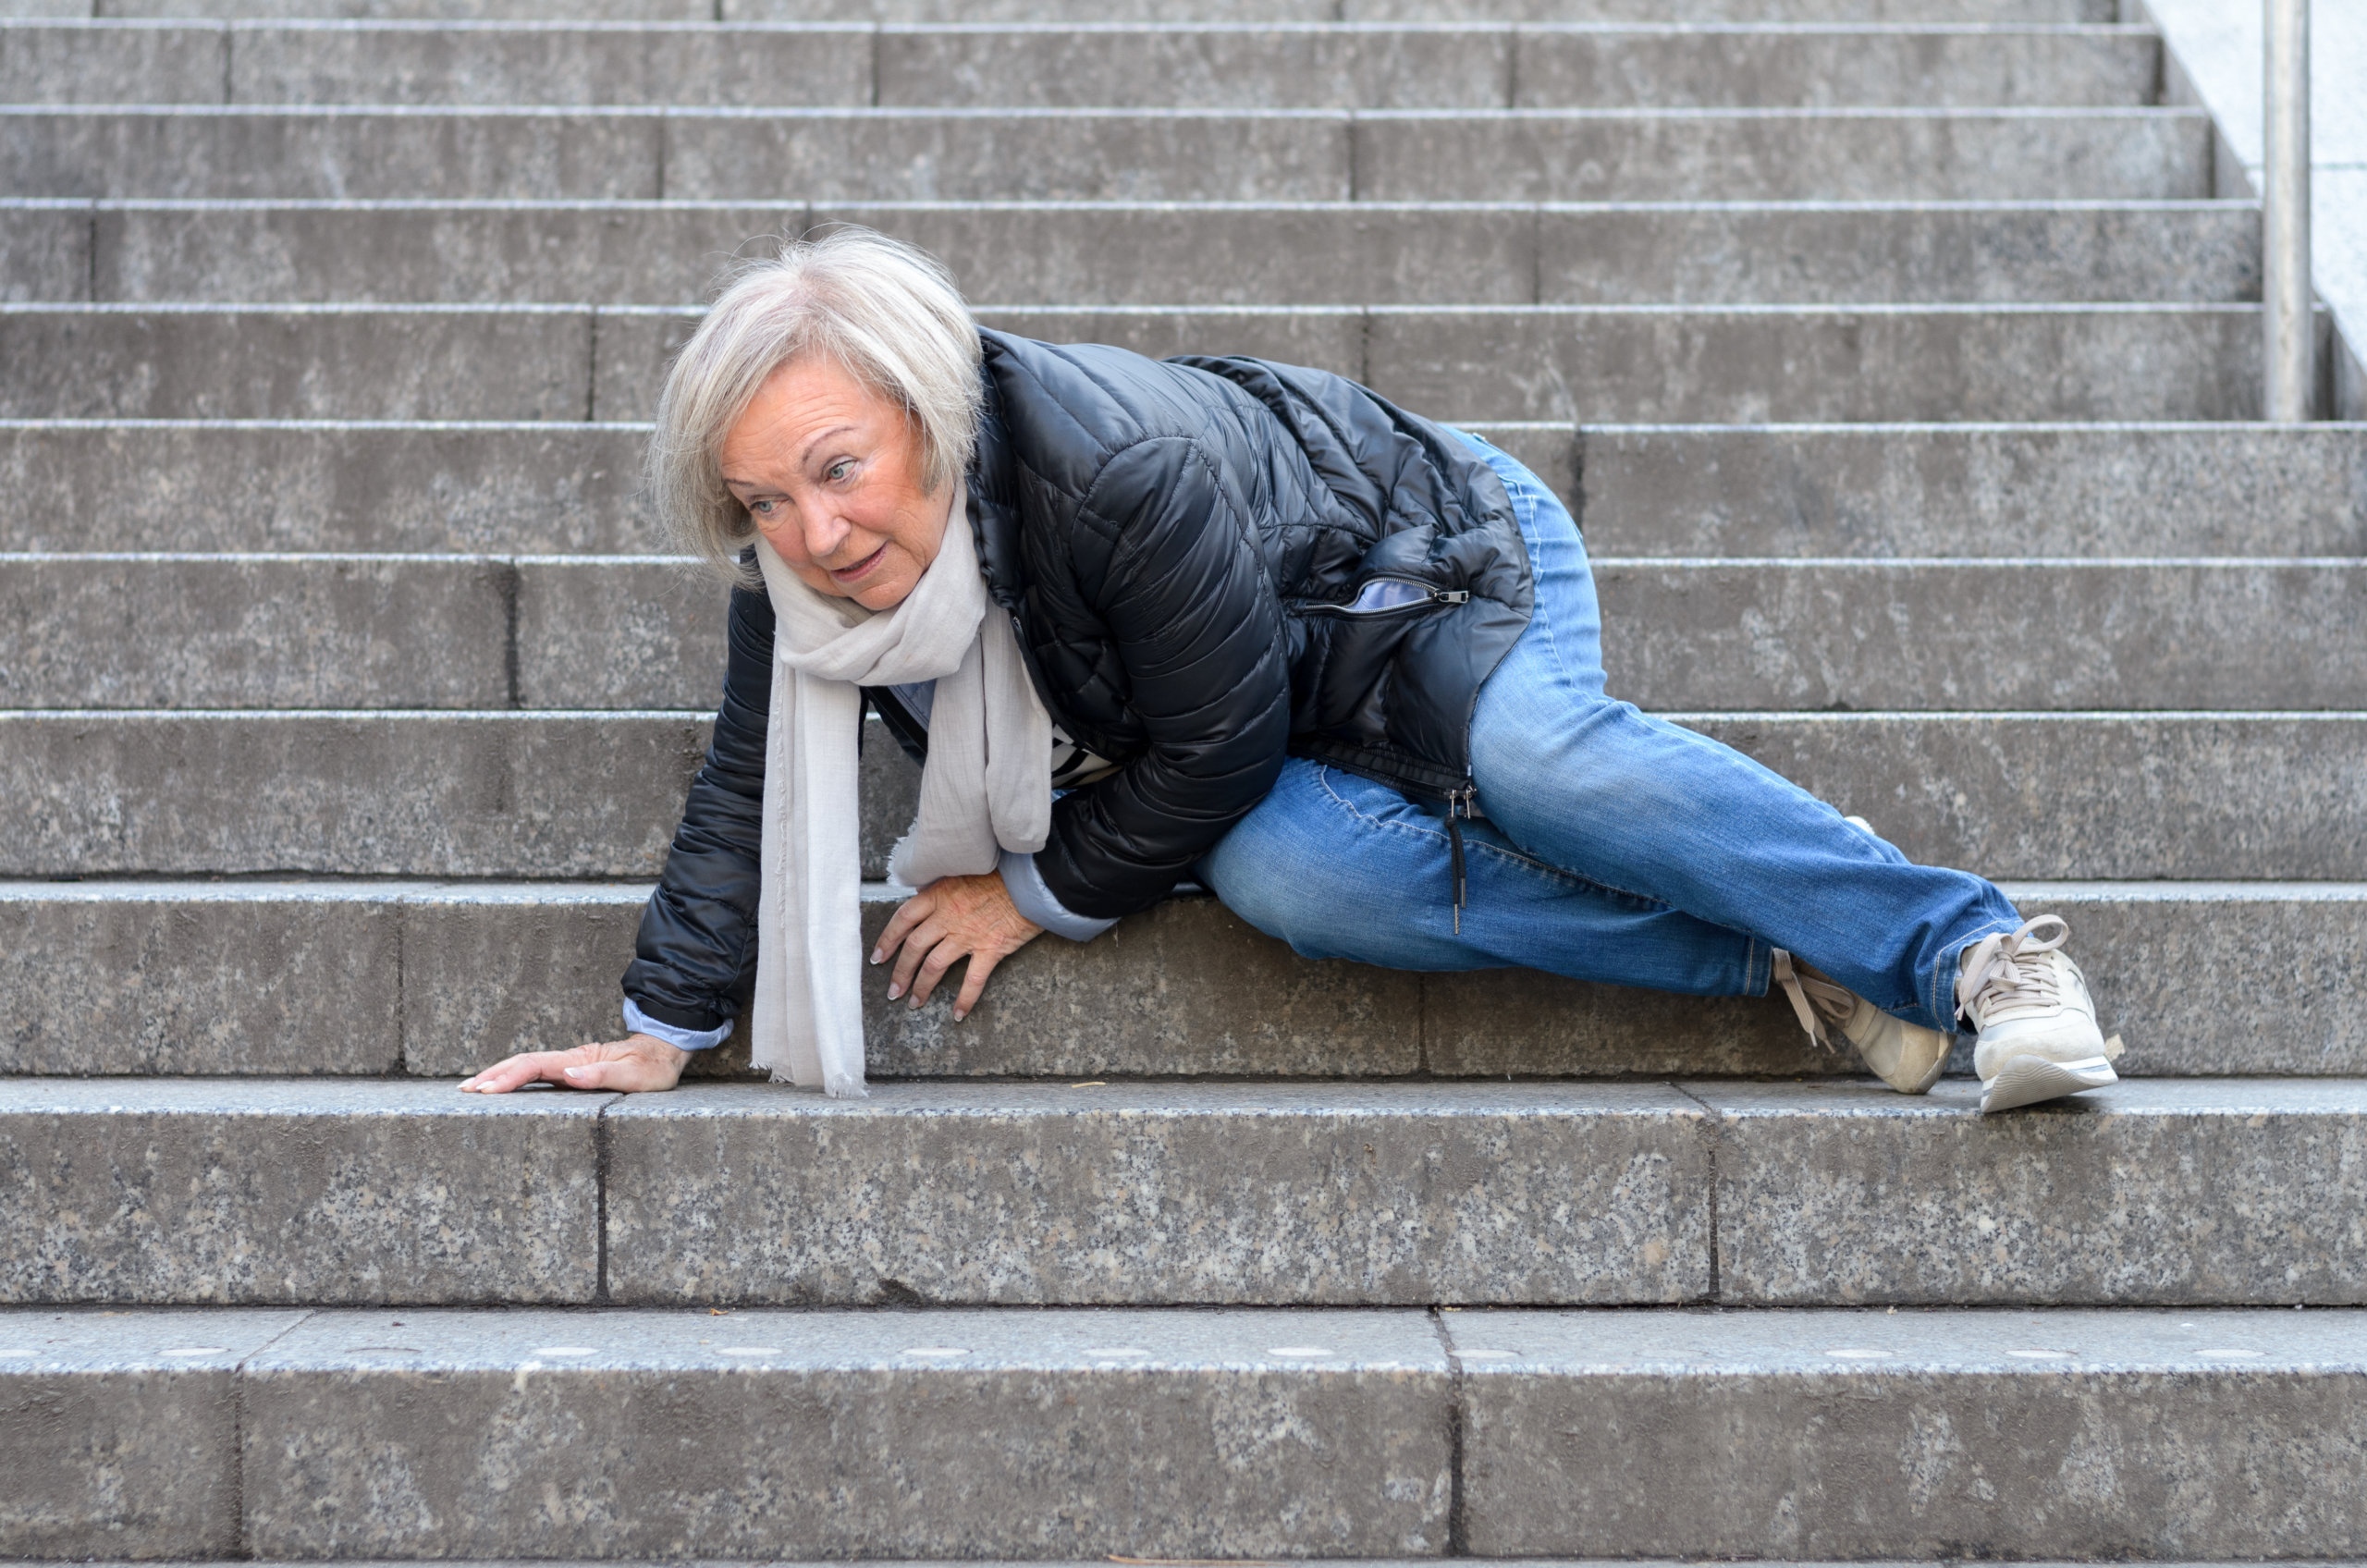 Did You Fall Down The Stairs? - Westchester Stair Accident Injury